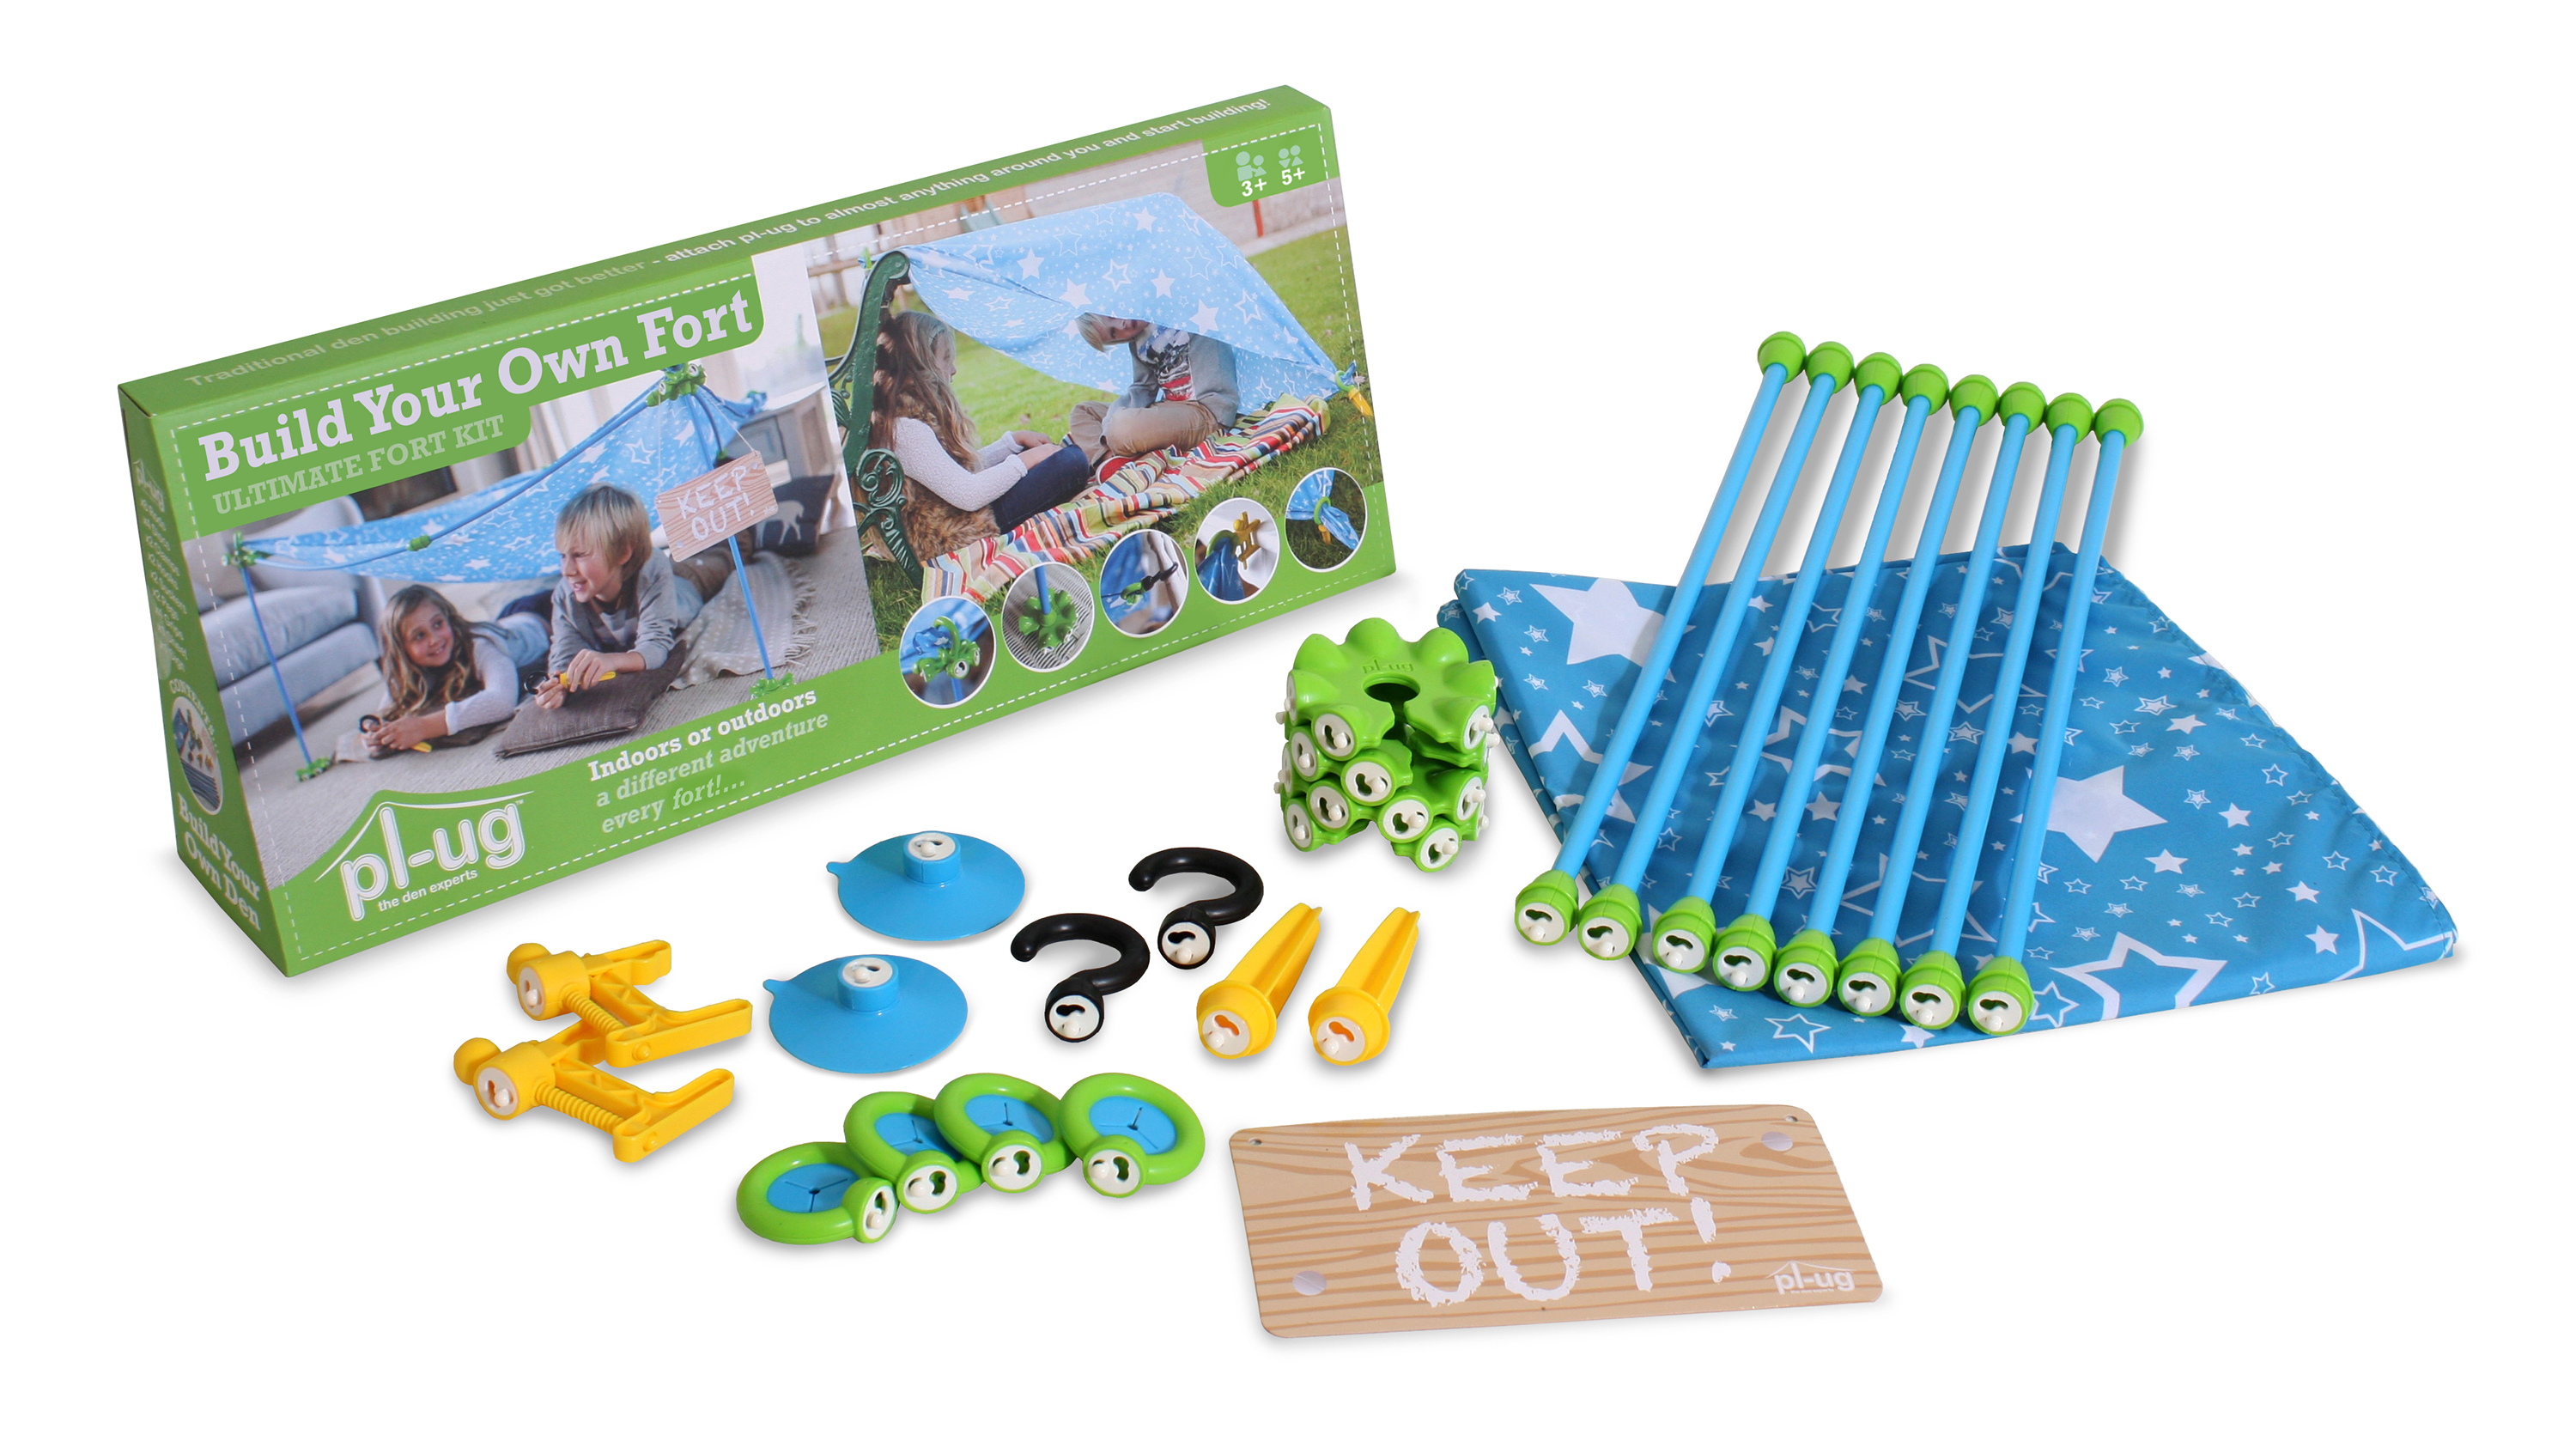 The ULTIMATE Build Your Own Fort kit from PL-UG